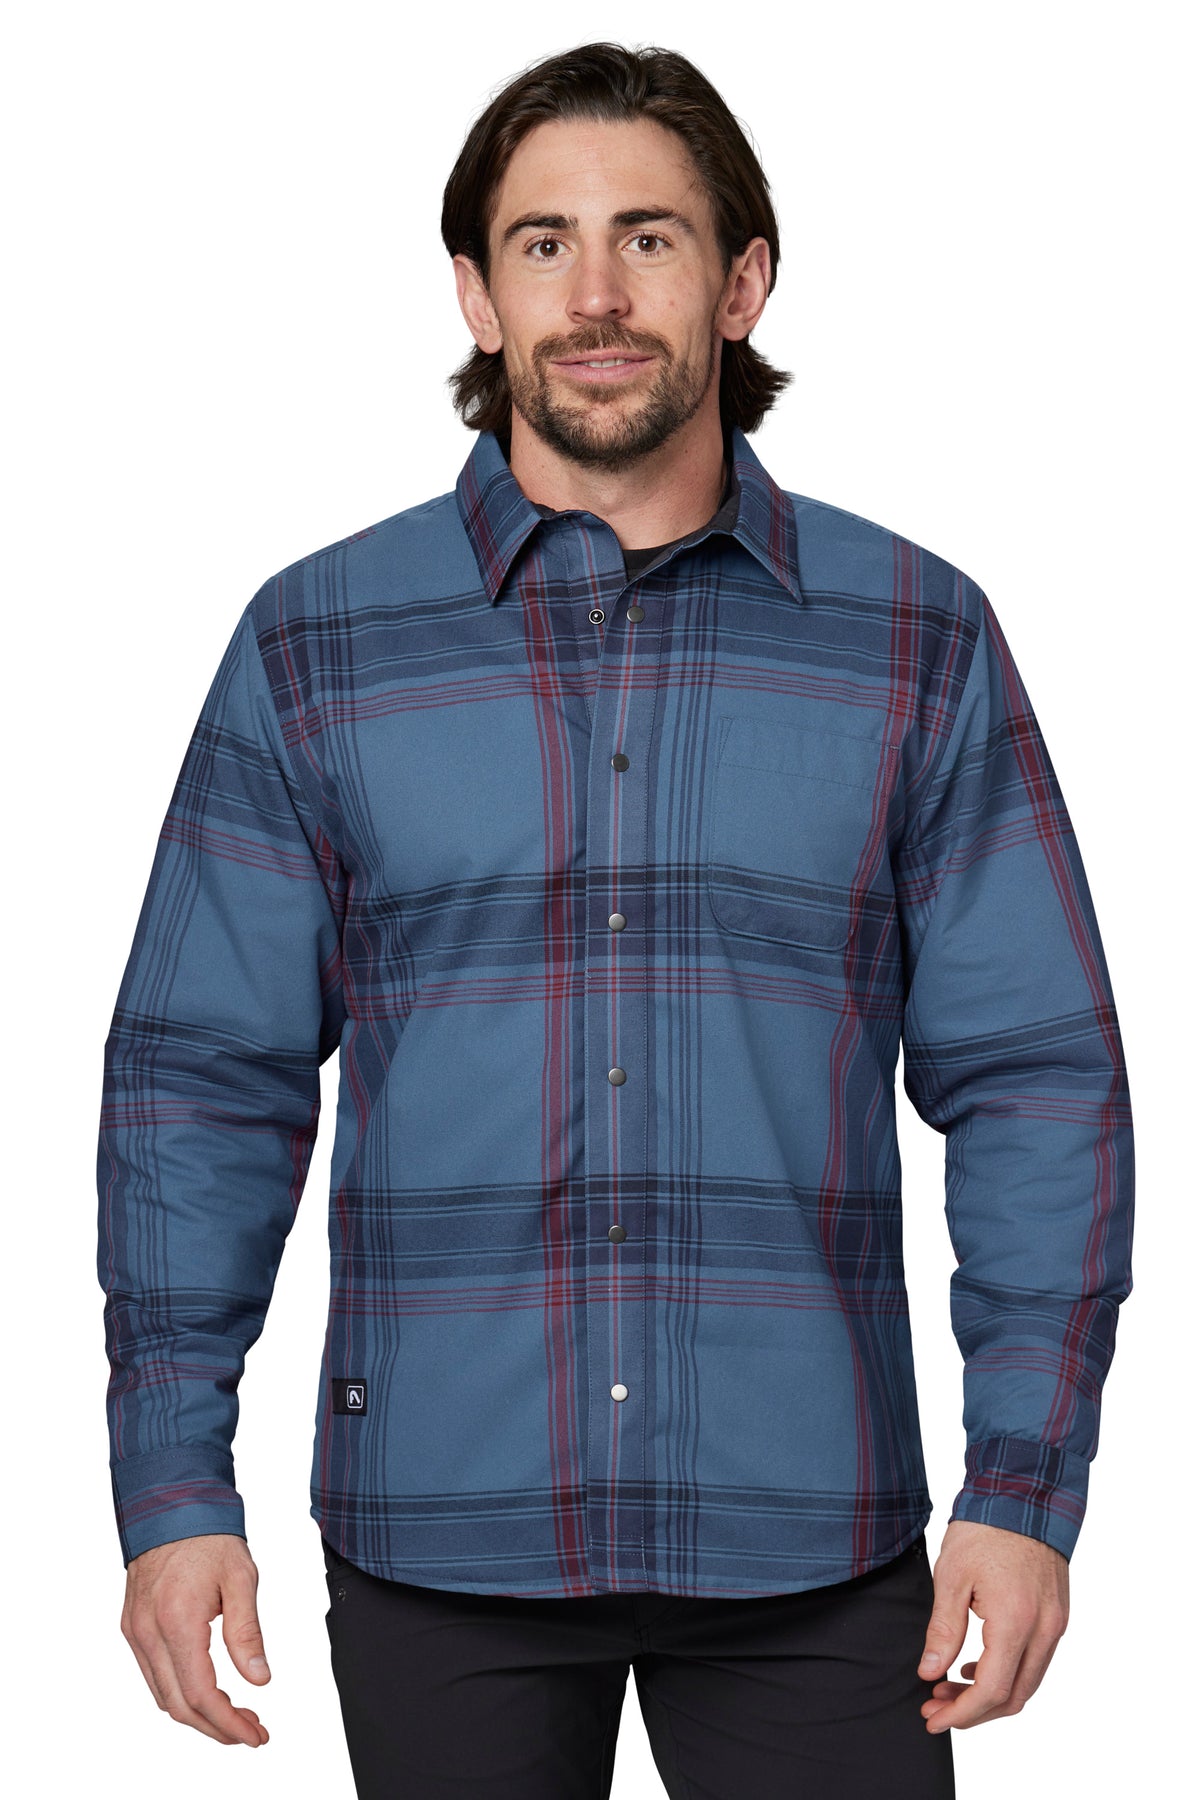 Flylow Sinclair Insulated Flannel - Men's Copper/Redwood, M